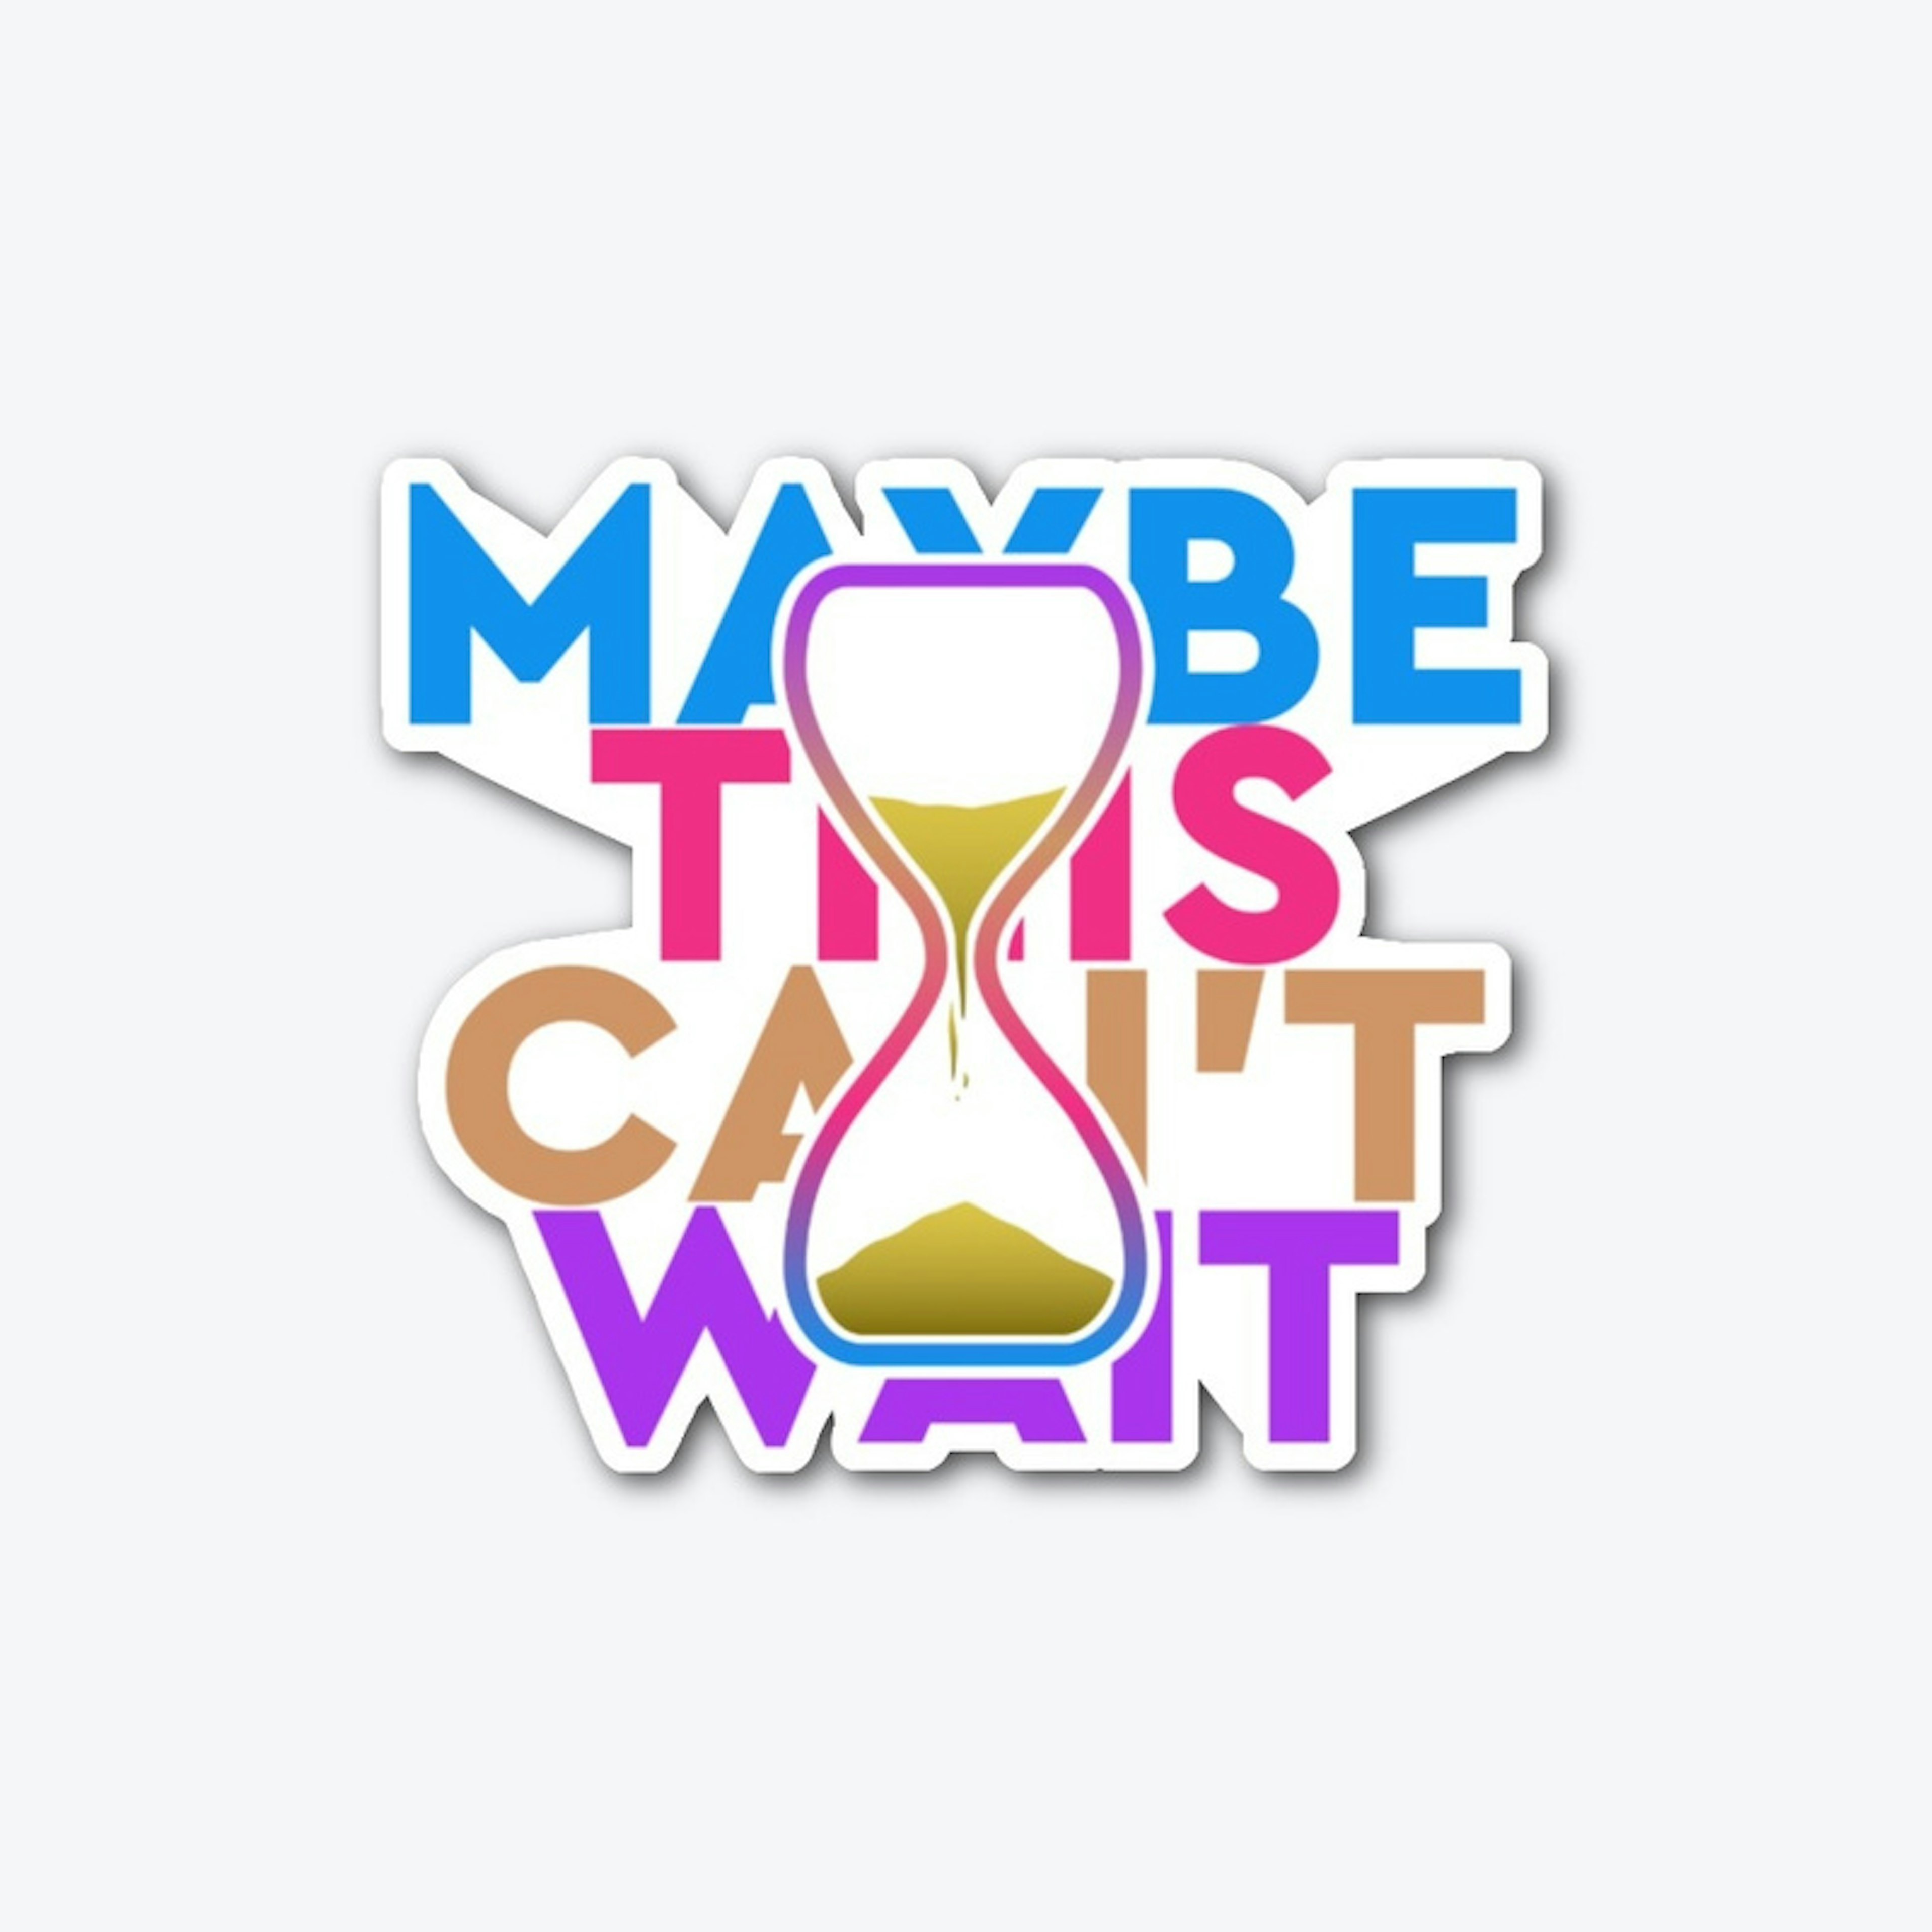 MAYBE THIS CAN'T WAIT Sticker